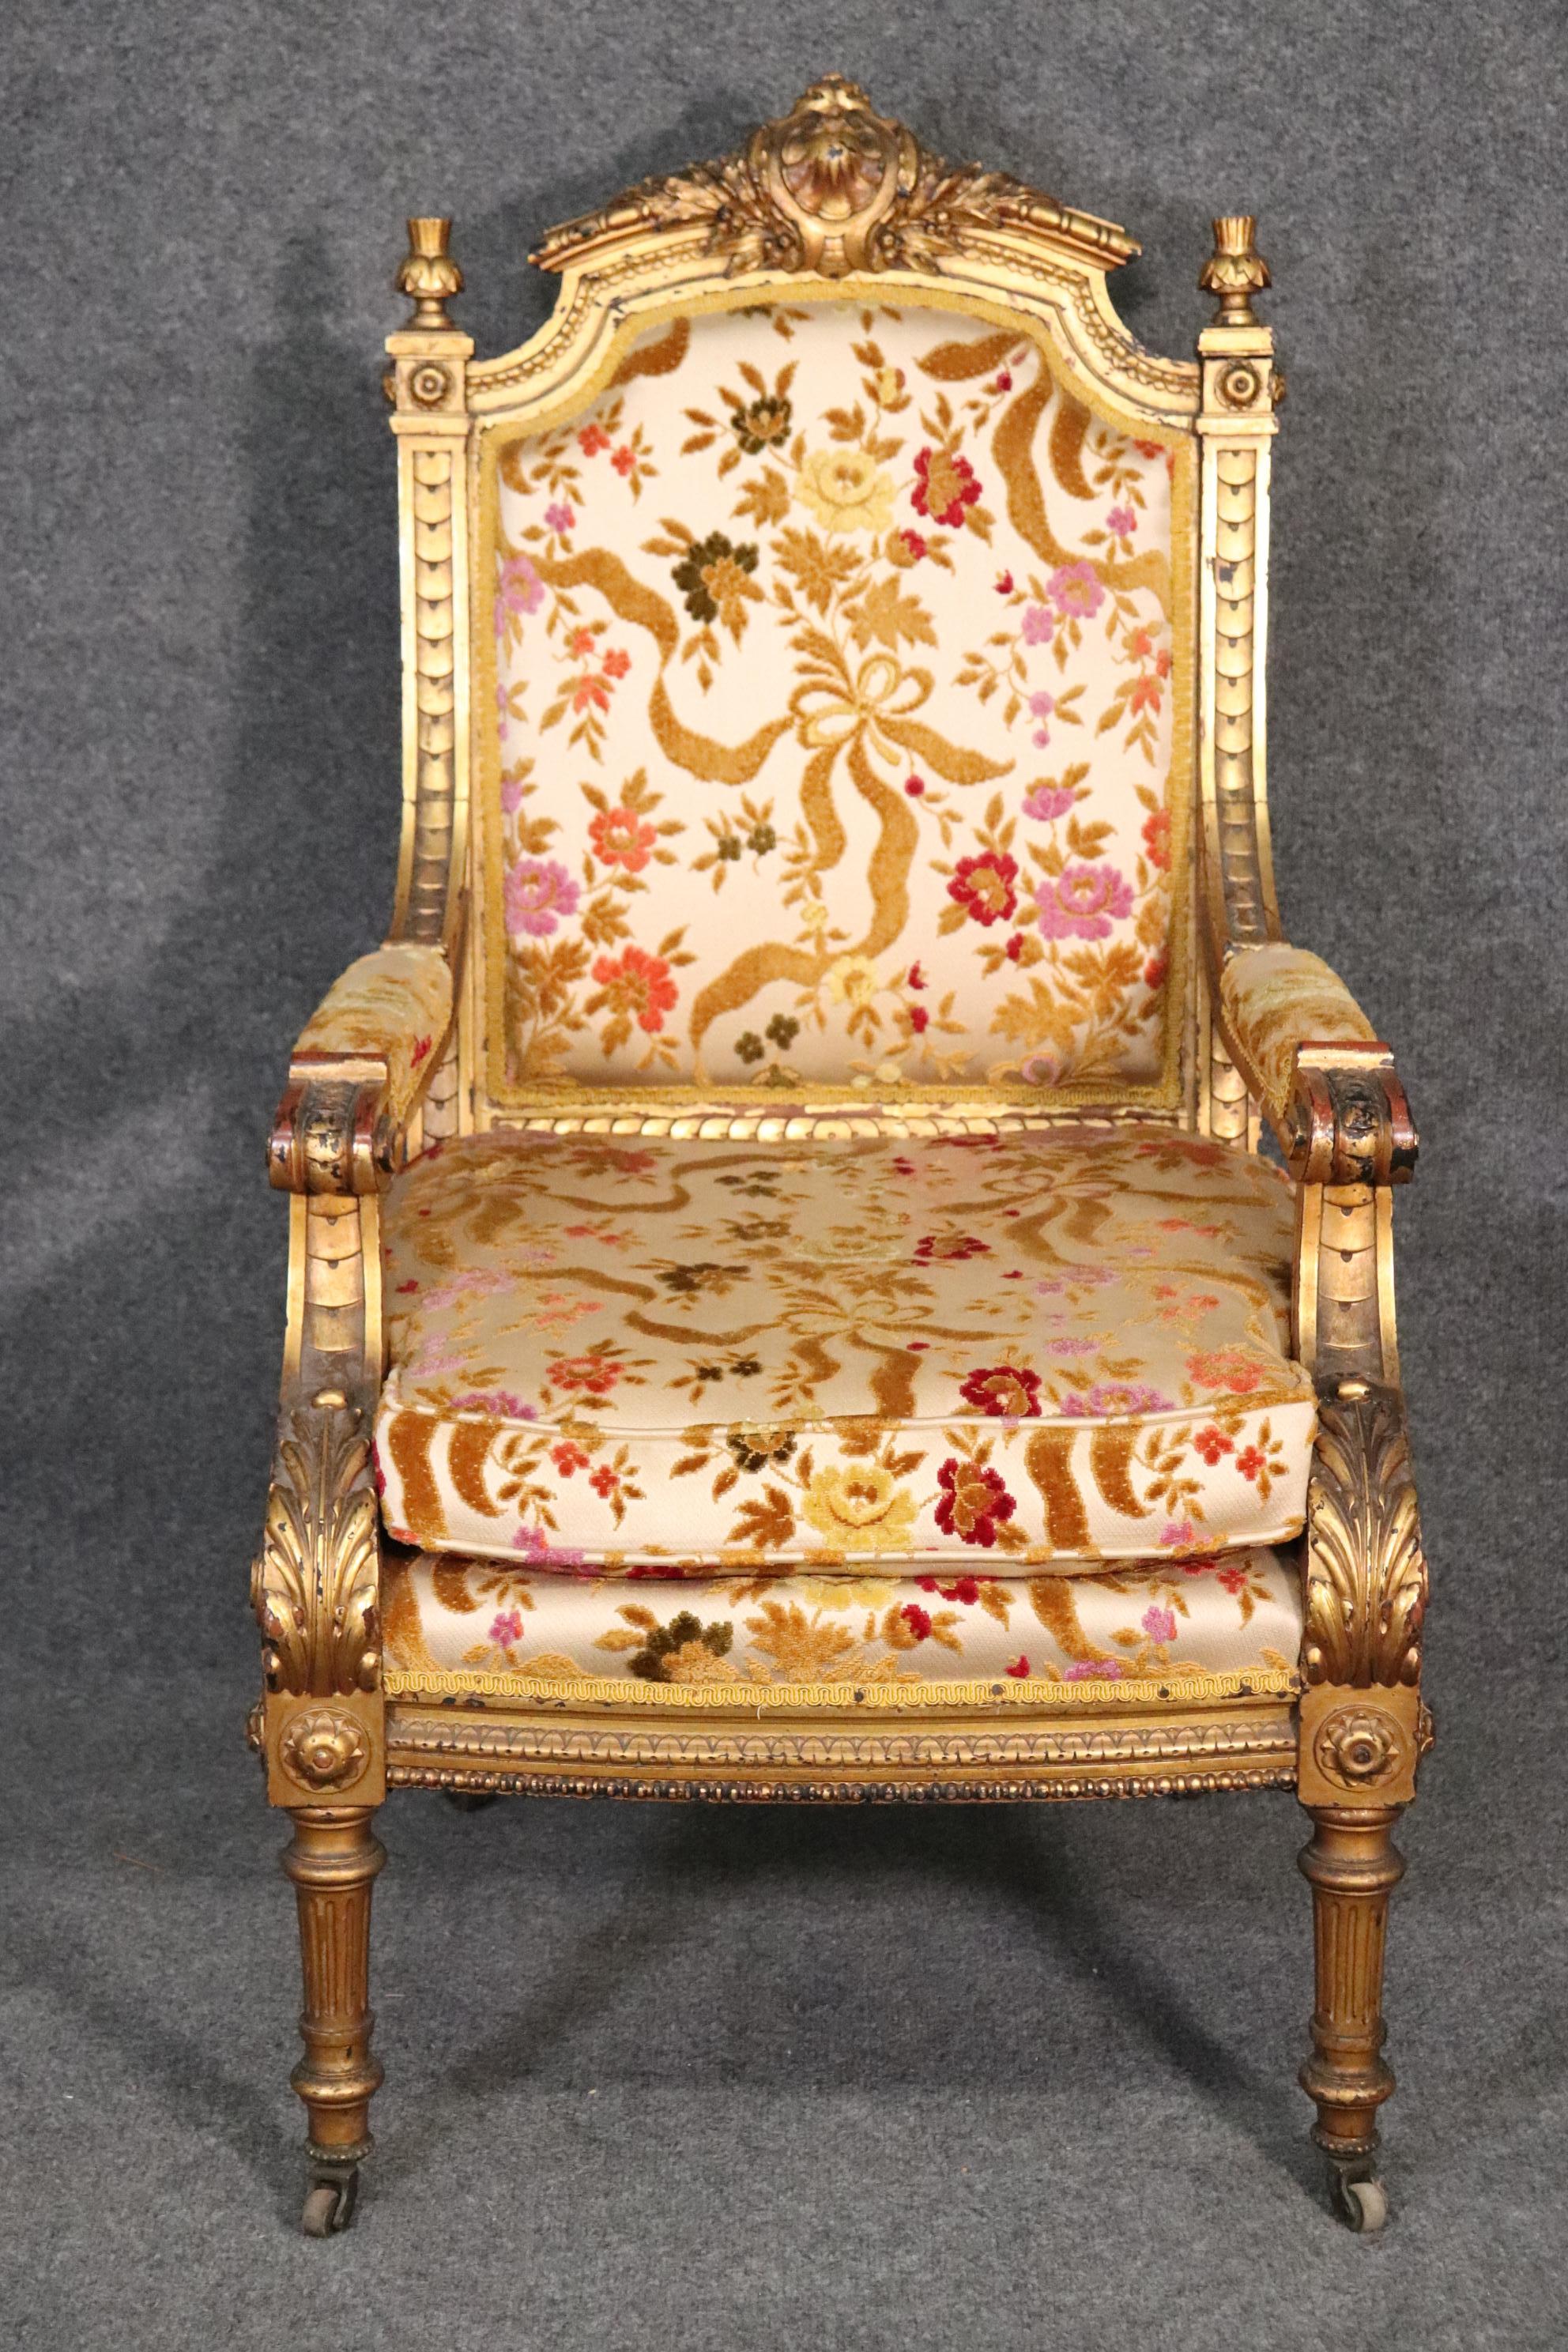 Luminous Gilded French Louis XVI Regal Looking Armchair Fauteuil In Good Condition For Sale In Swedesboro, NJ